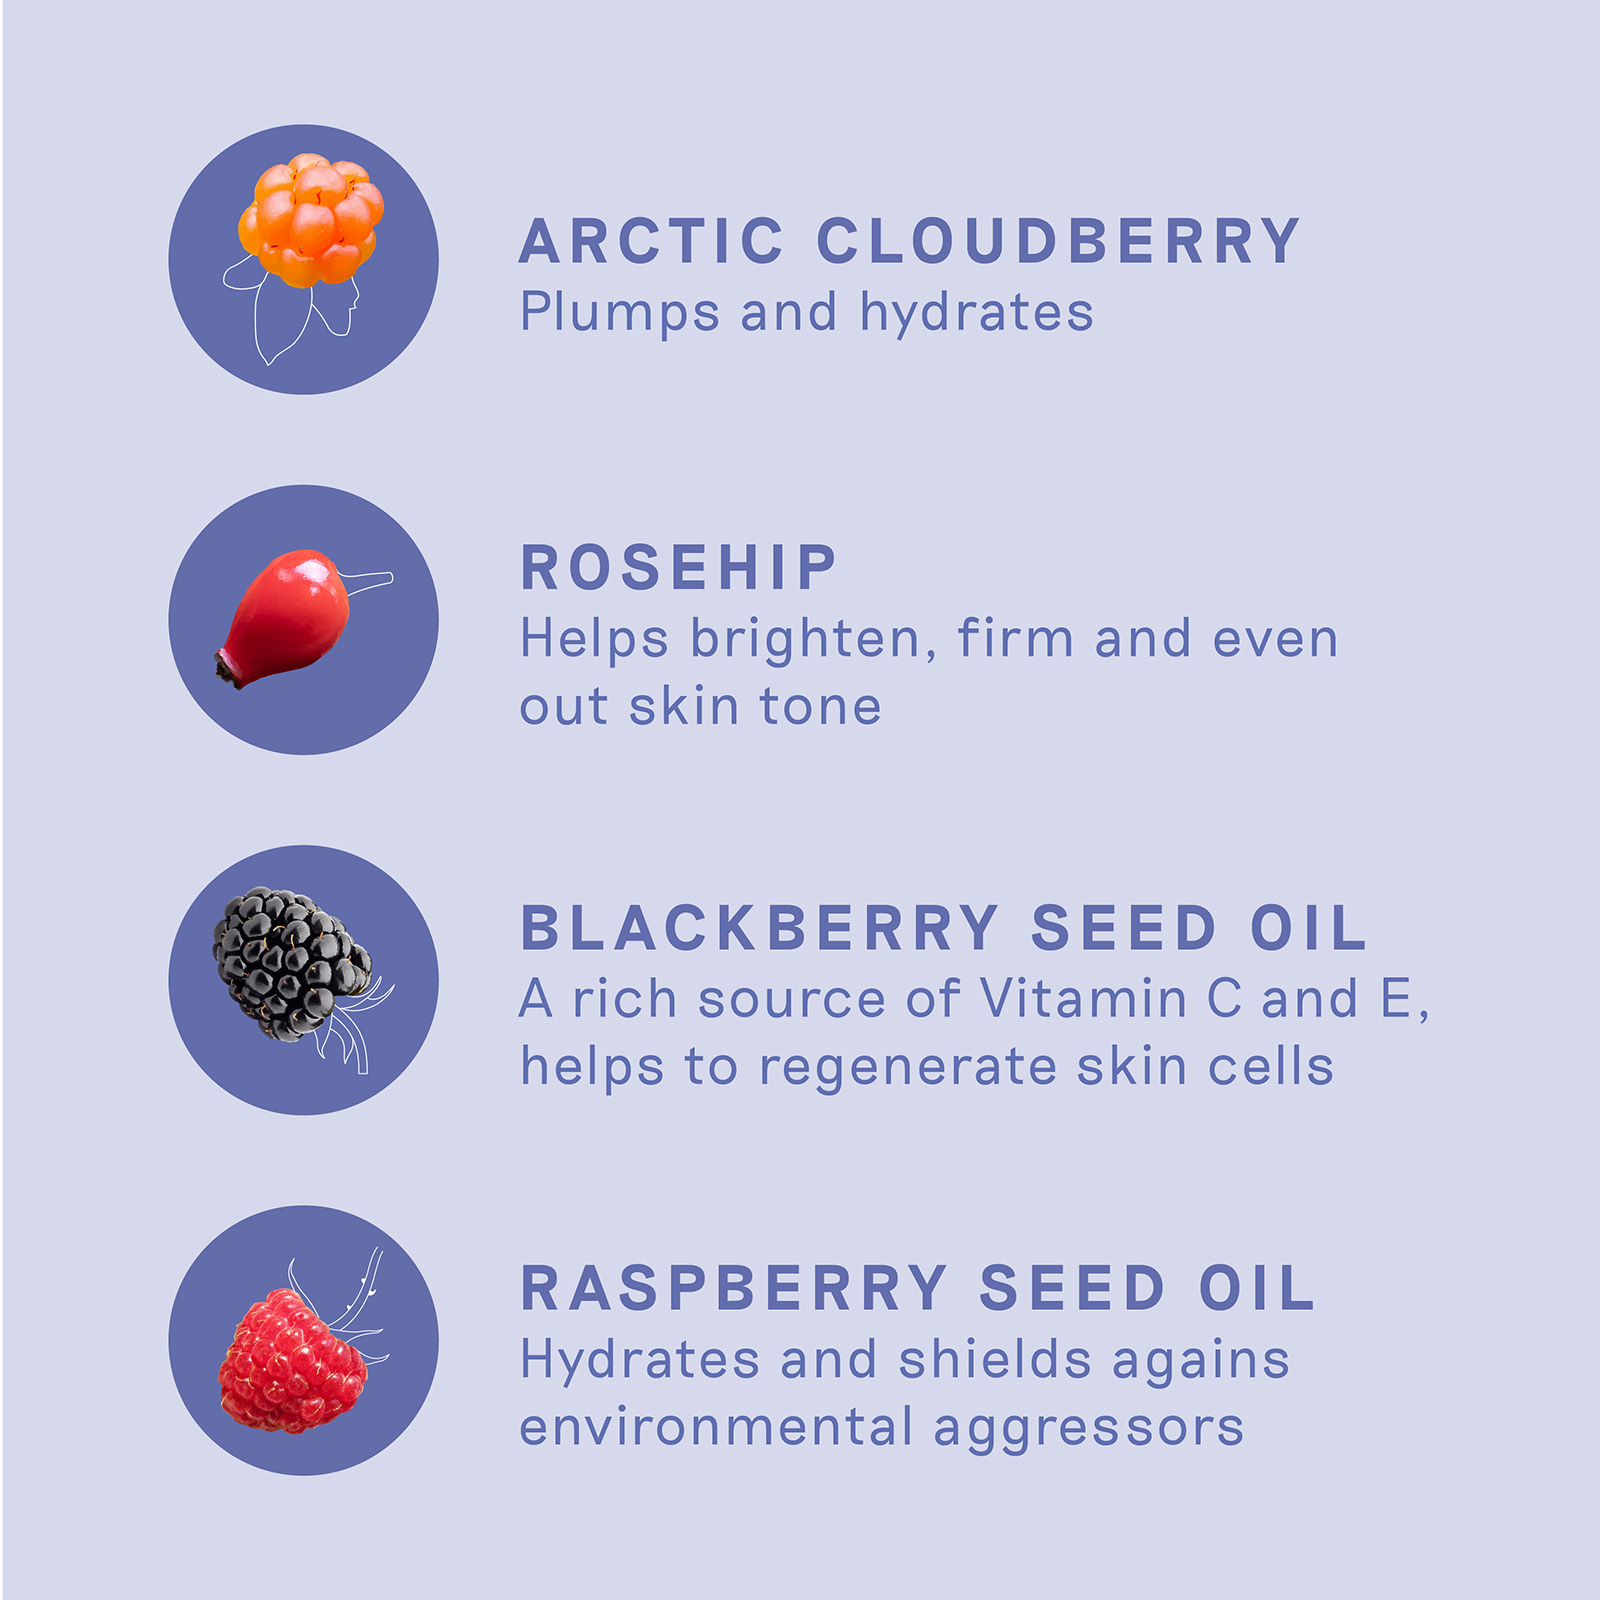 Ingredients and their benefits